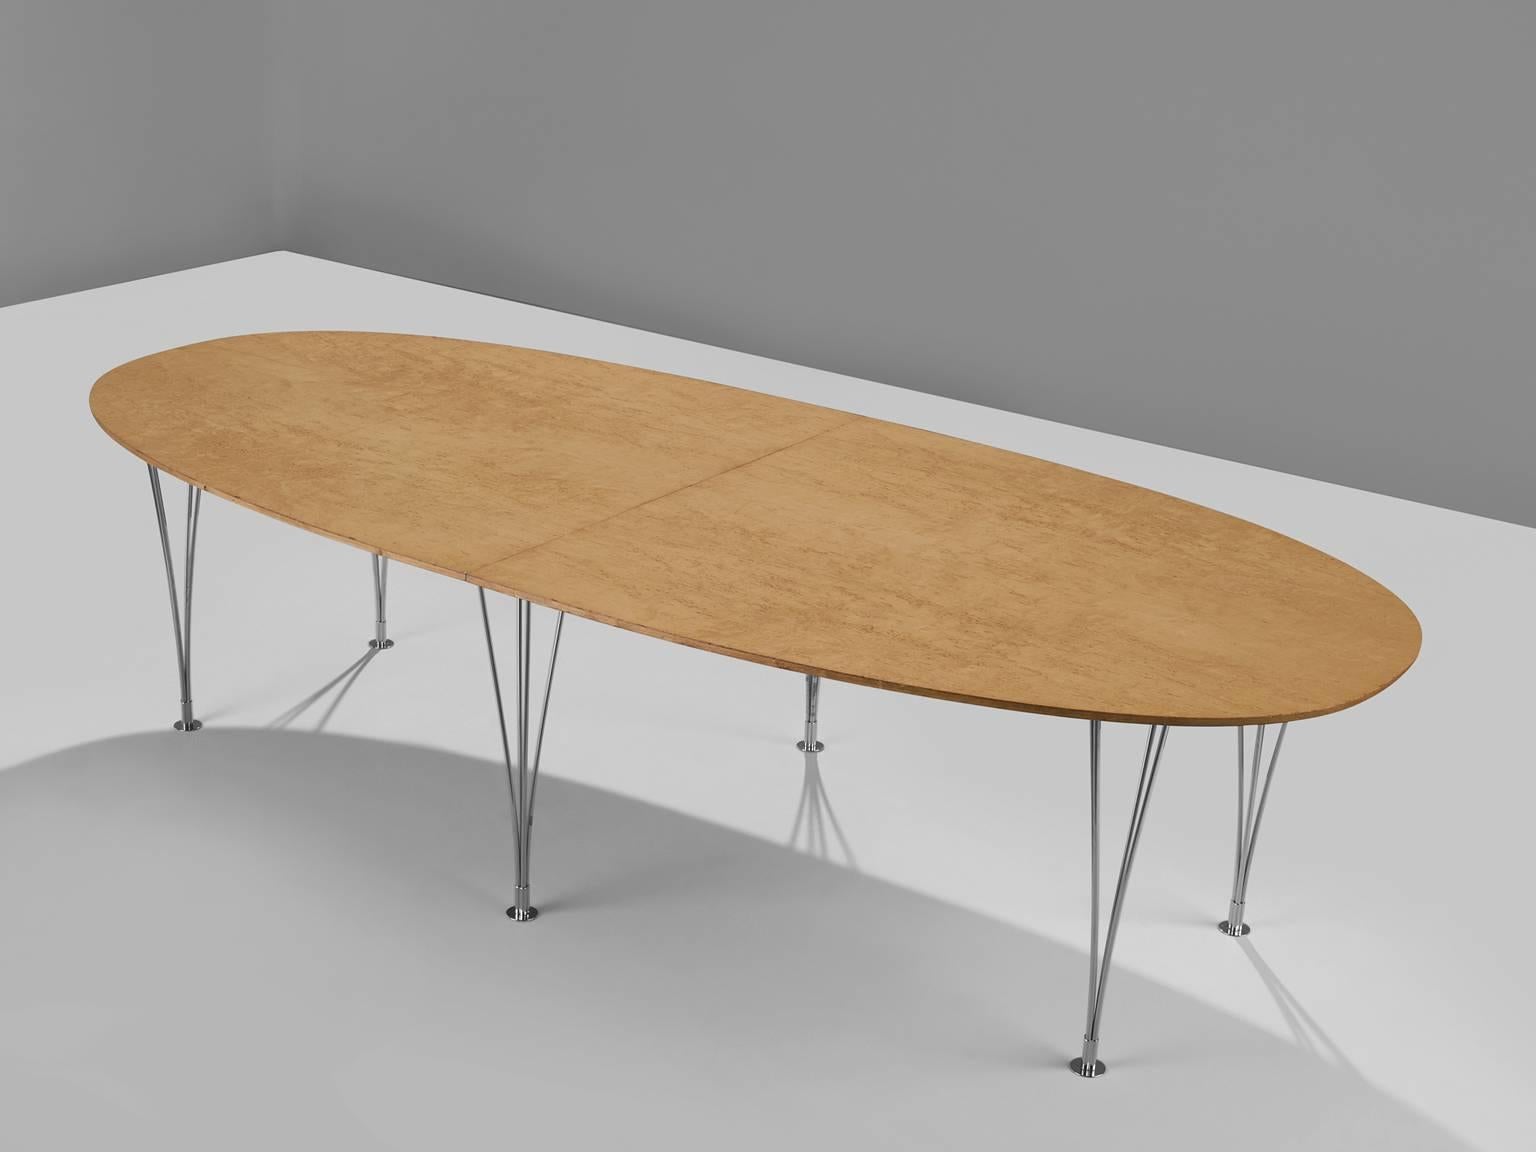 Extendable dining table, in beech and steel, by Piet Hein, Arne Jacobsen & Bruno Mathsson for Fritz Hansen, Denmark, 1968. 

Super-Ellipse dining table with two extension leaves, in beech and steel. This version is produced by Fritz Hansen in